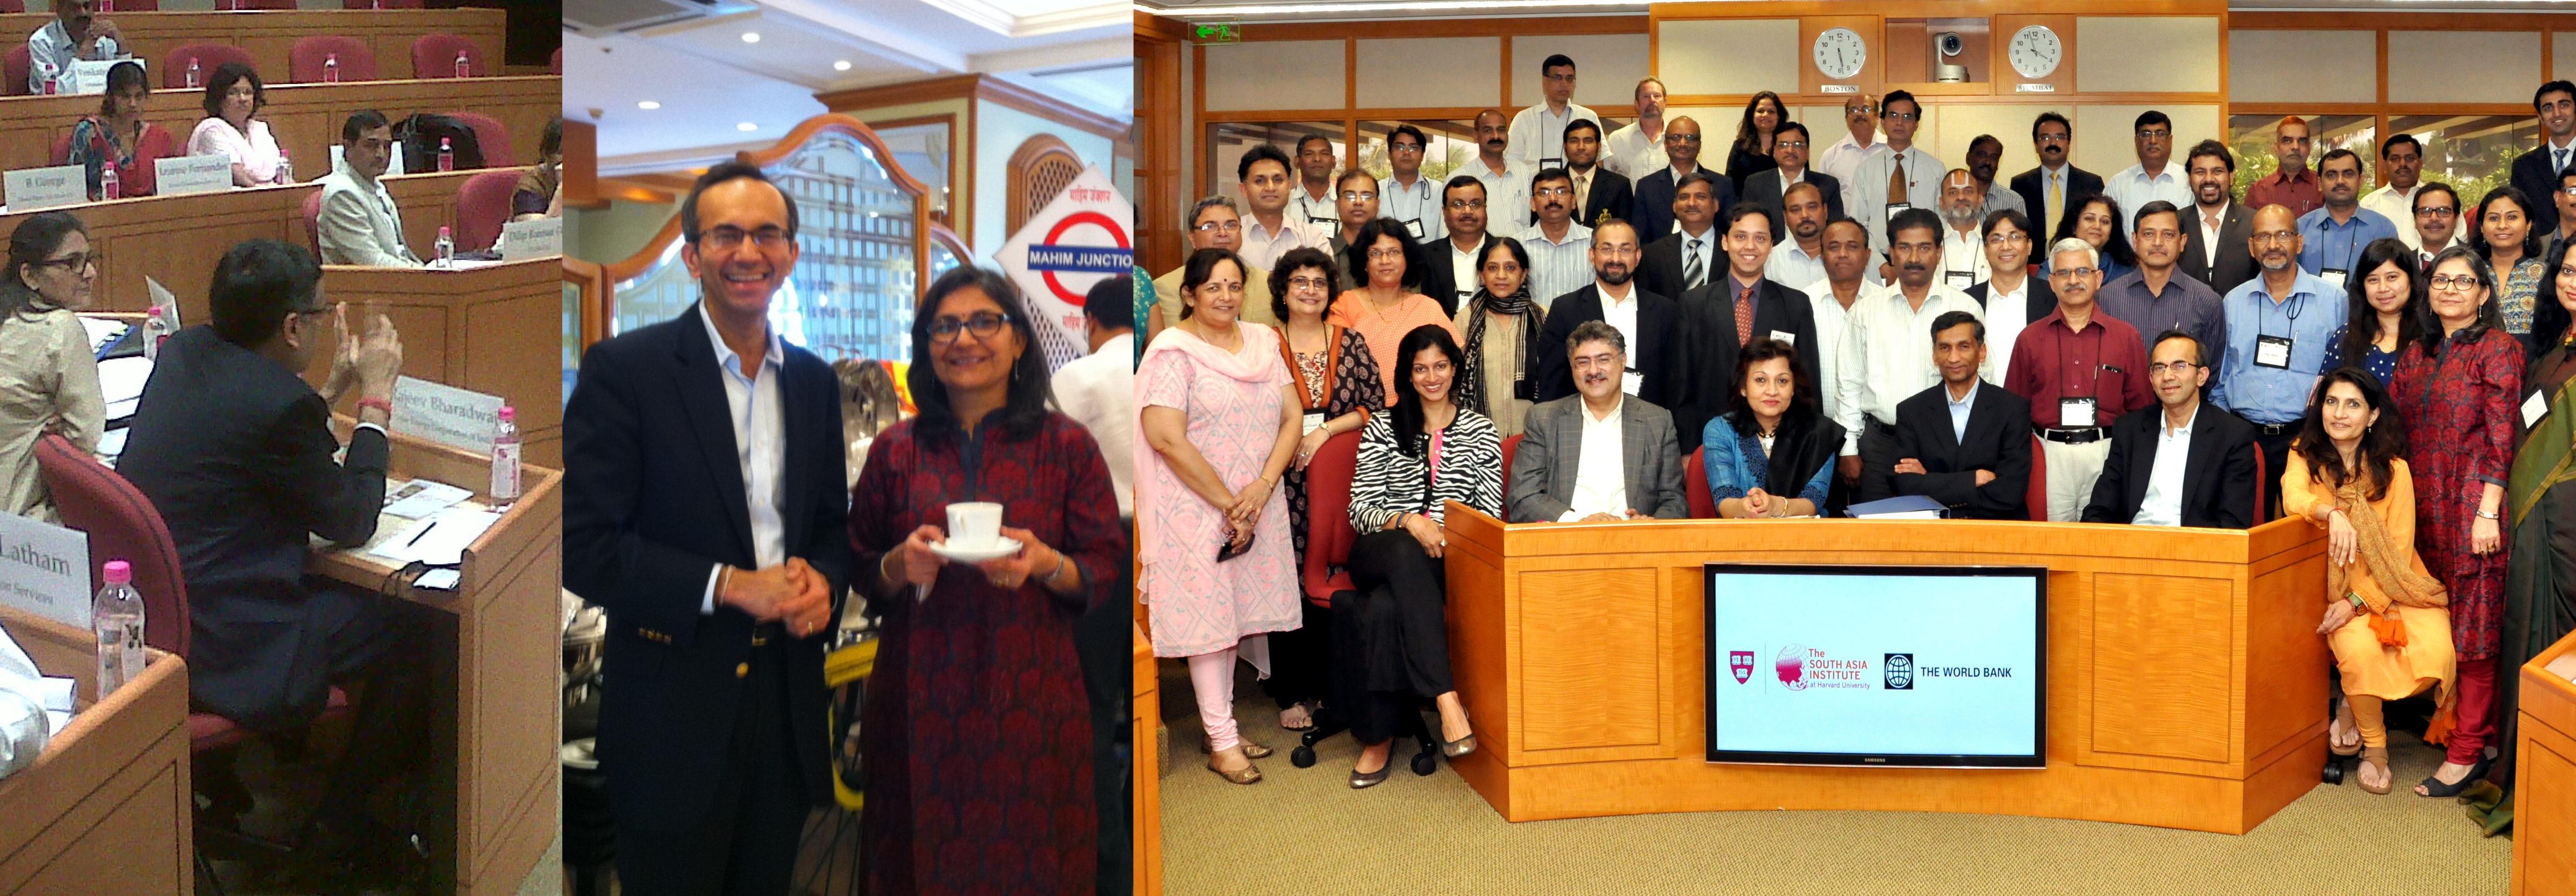 Harvard faculty share corporate social responsibility lessons with leaders in Mumbai